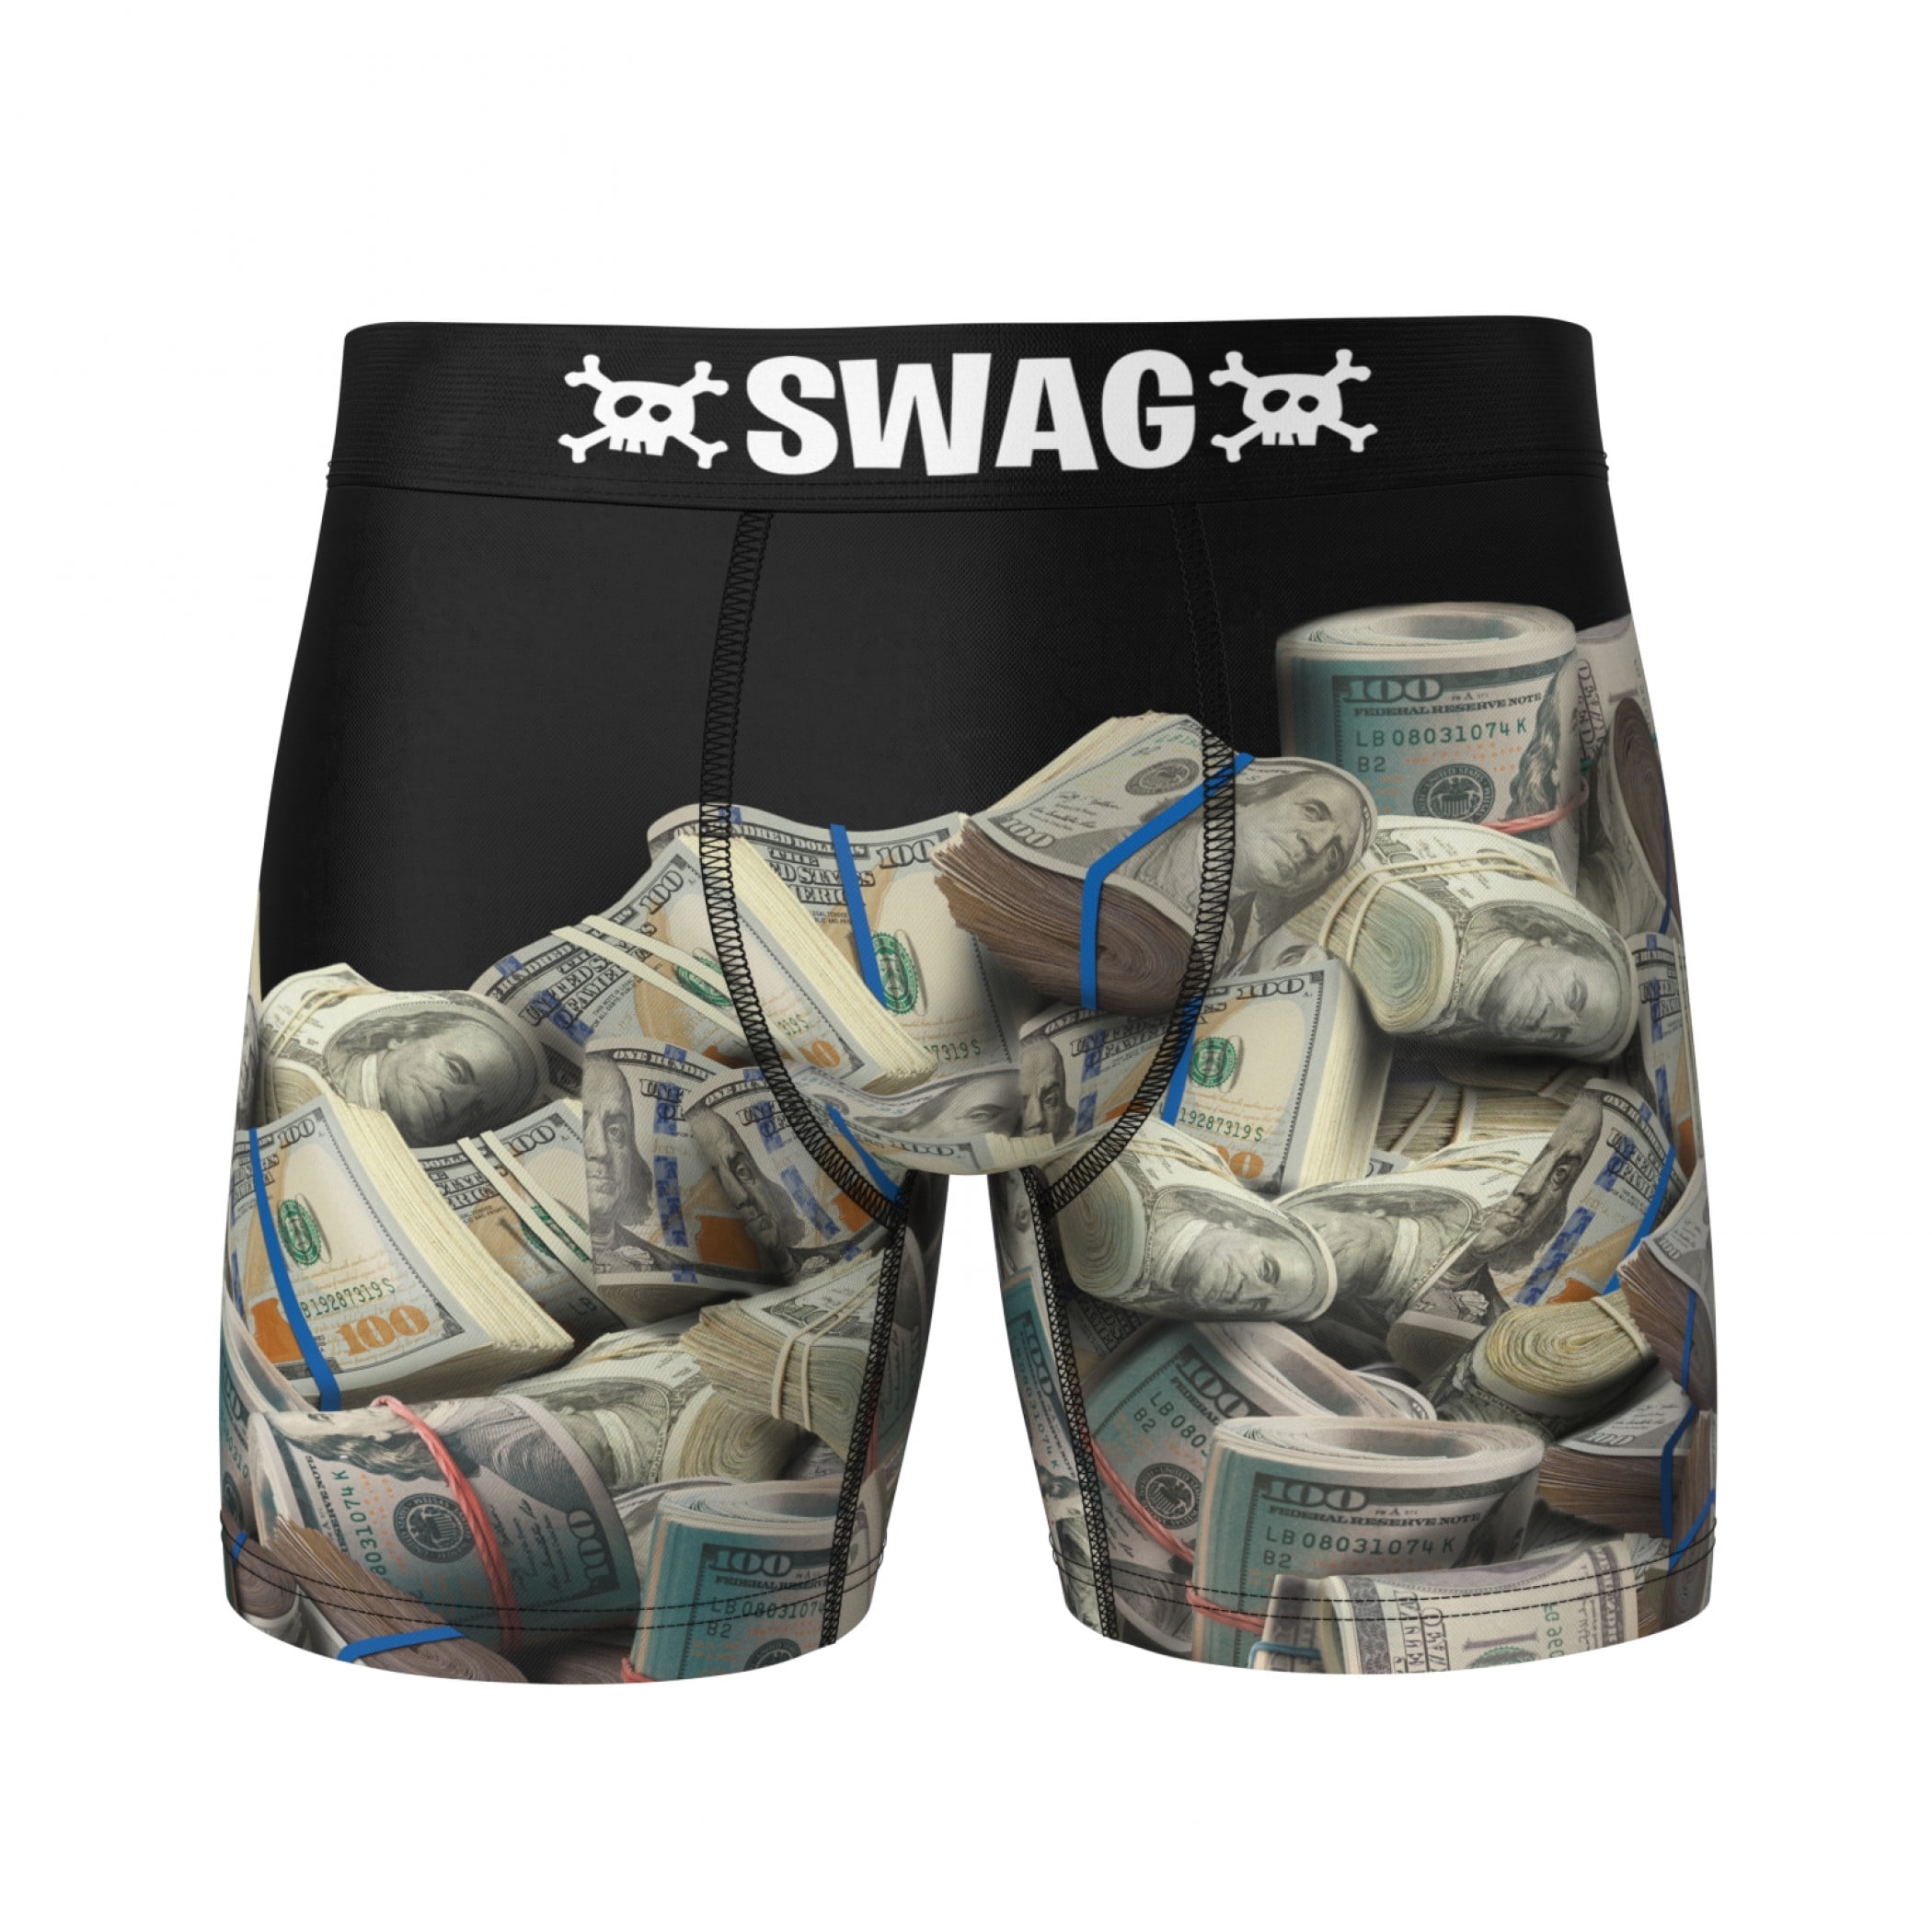 Rolls of Cash Swag Boxer Briefs-Large (36-38) 